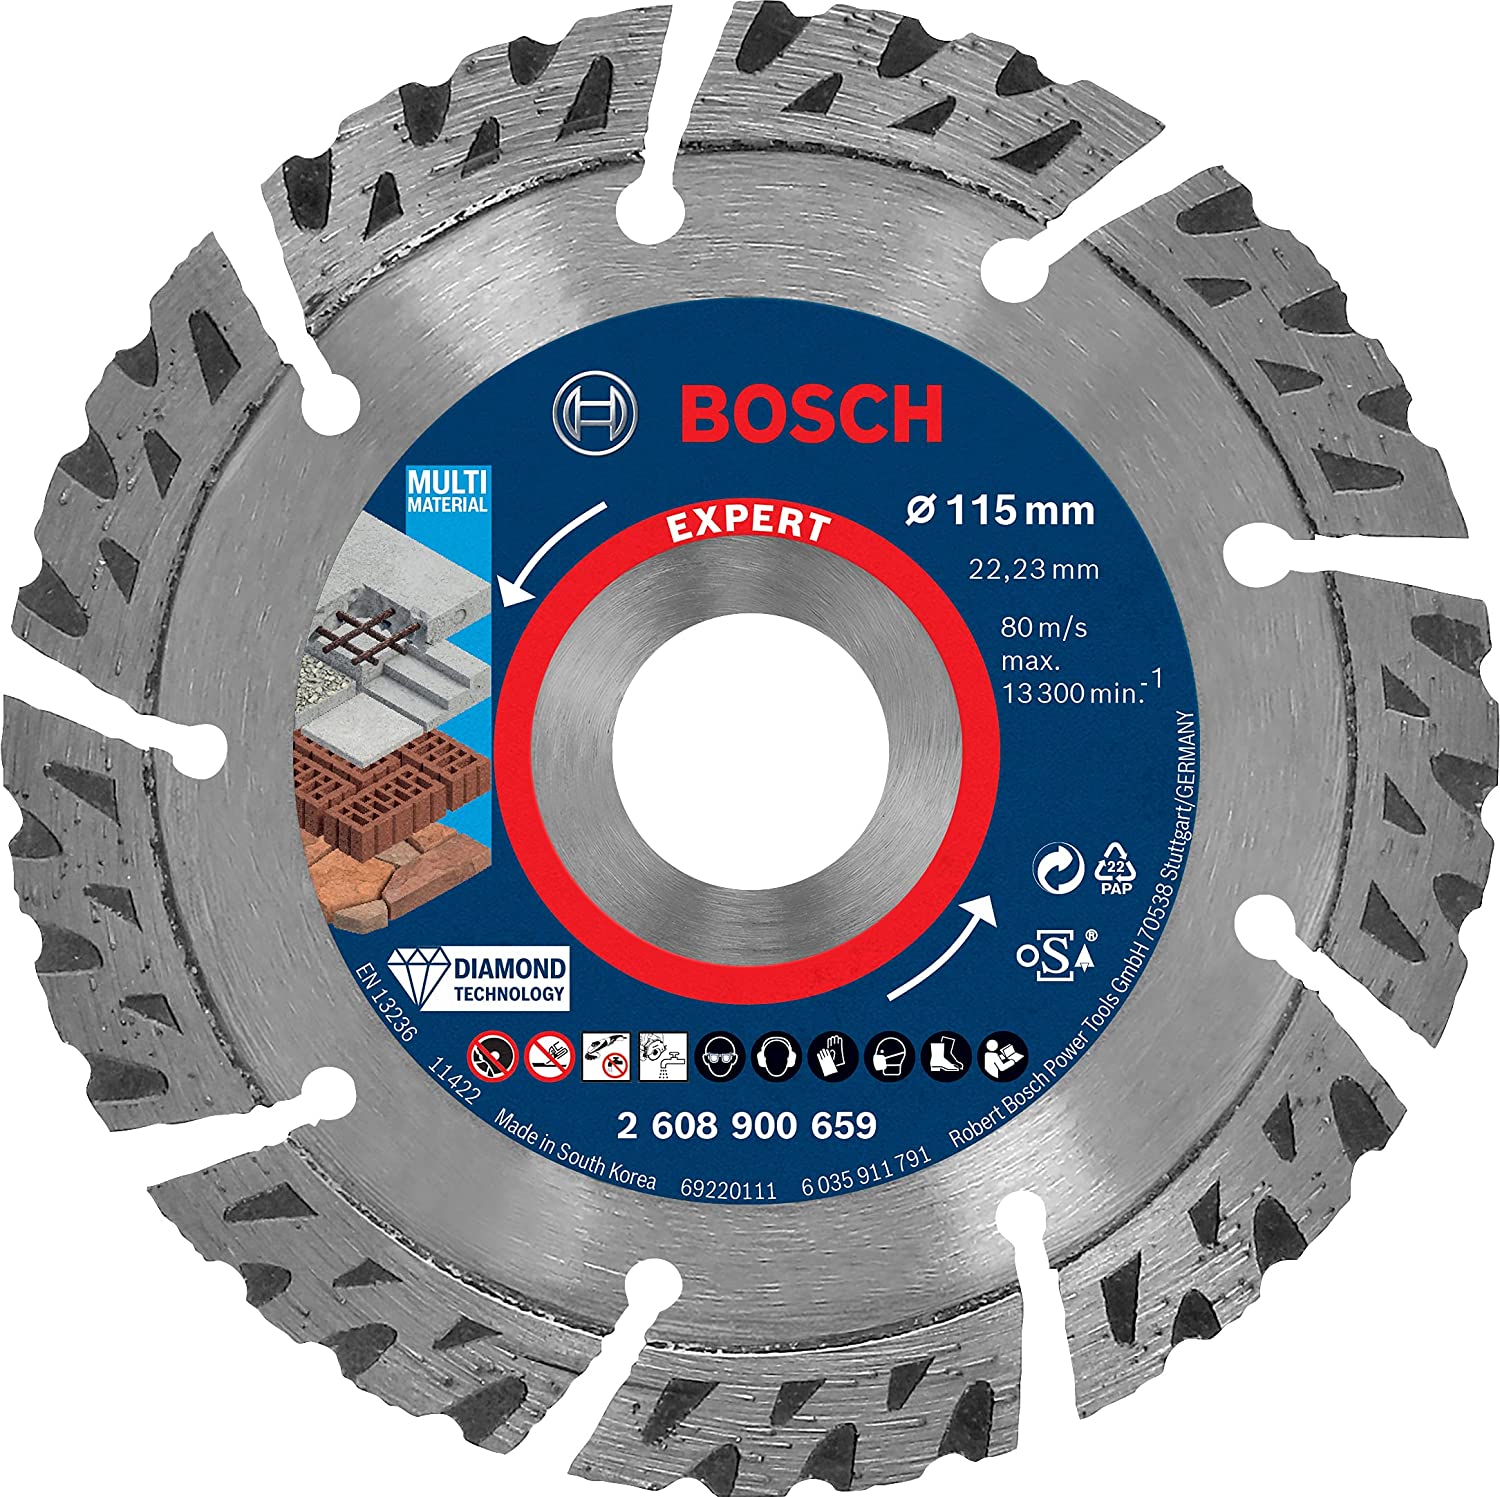 Bosch Expert diamond cutting disc 'MultiMaterial', O 115mm (for small angle grinders) 2608900659 (4059952539942)